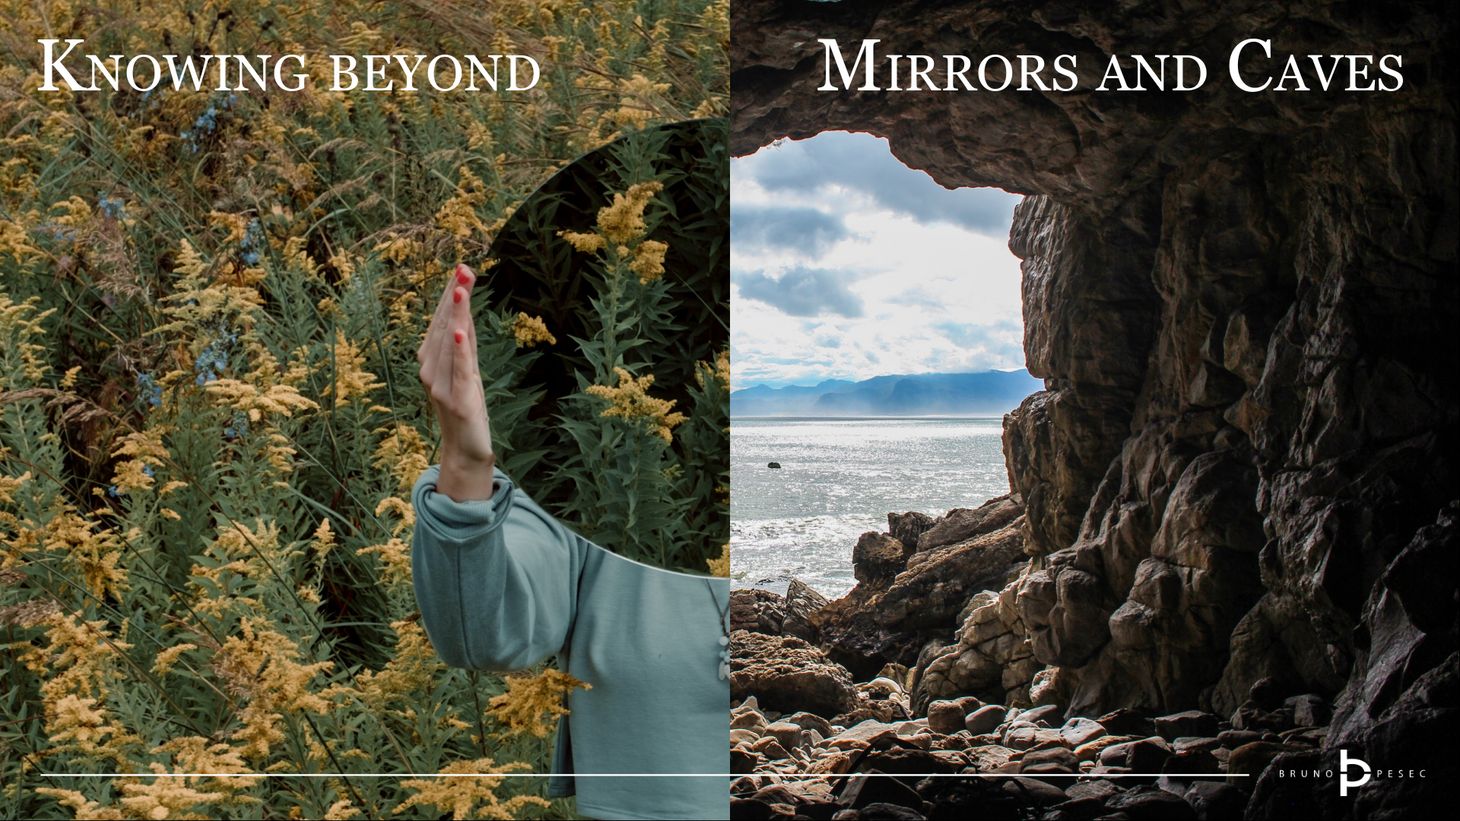 Knowing beyond mirrors and caves